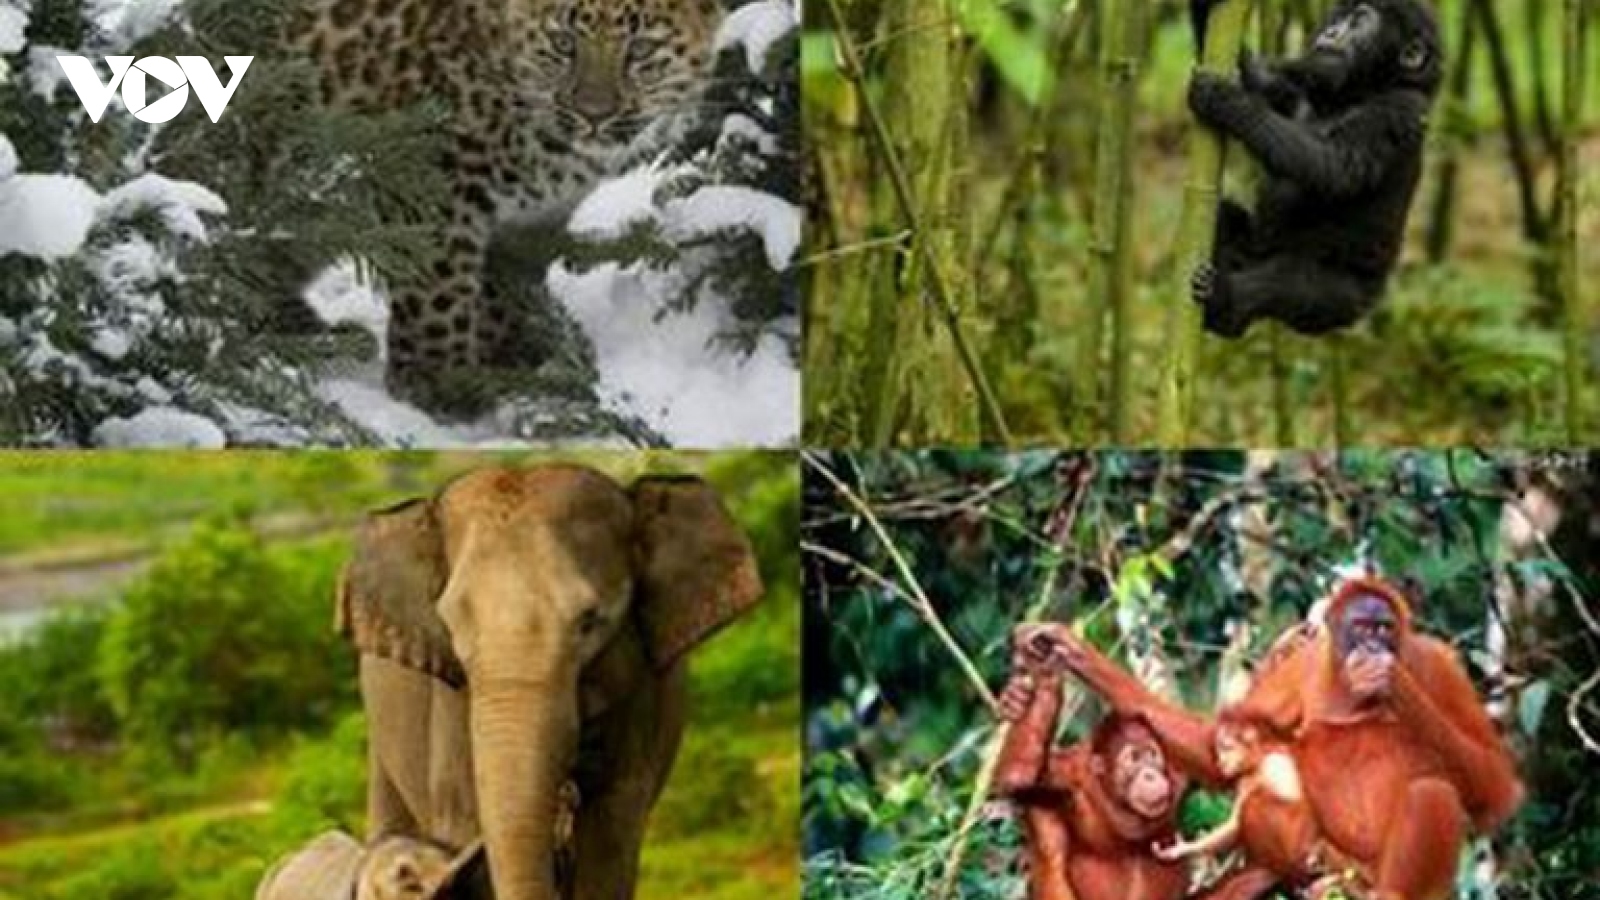 21 organisations and individuals to be honoured for contributions to wildlife conservation